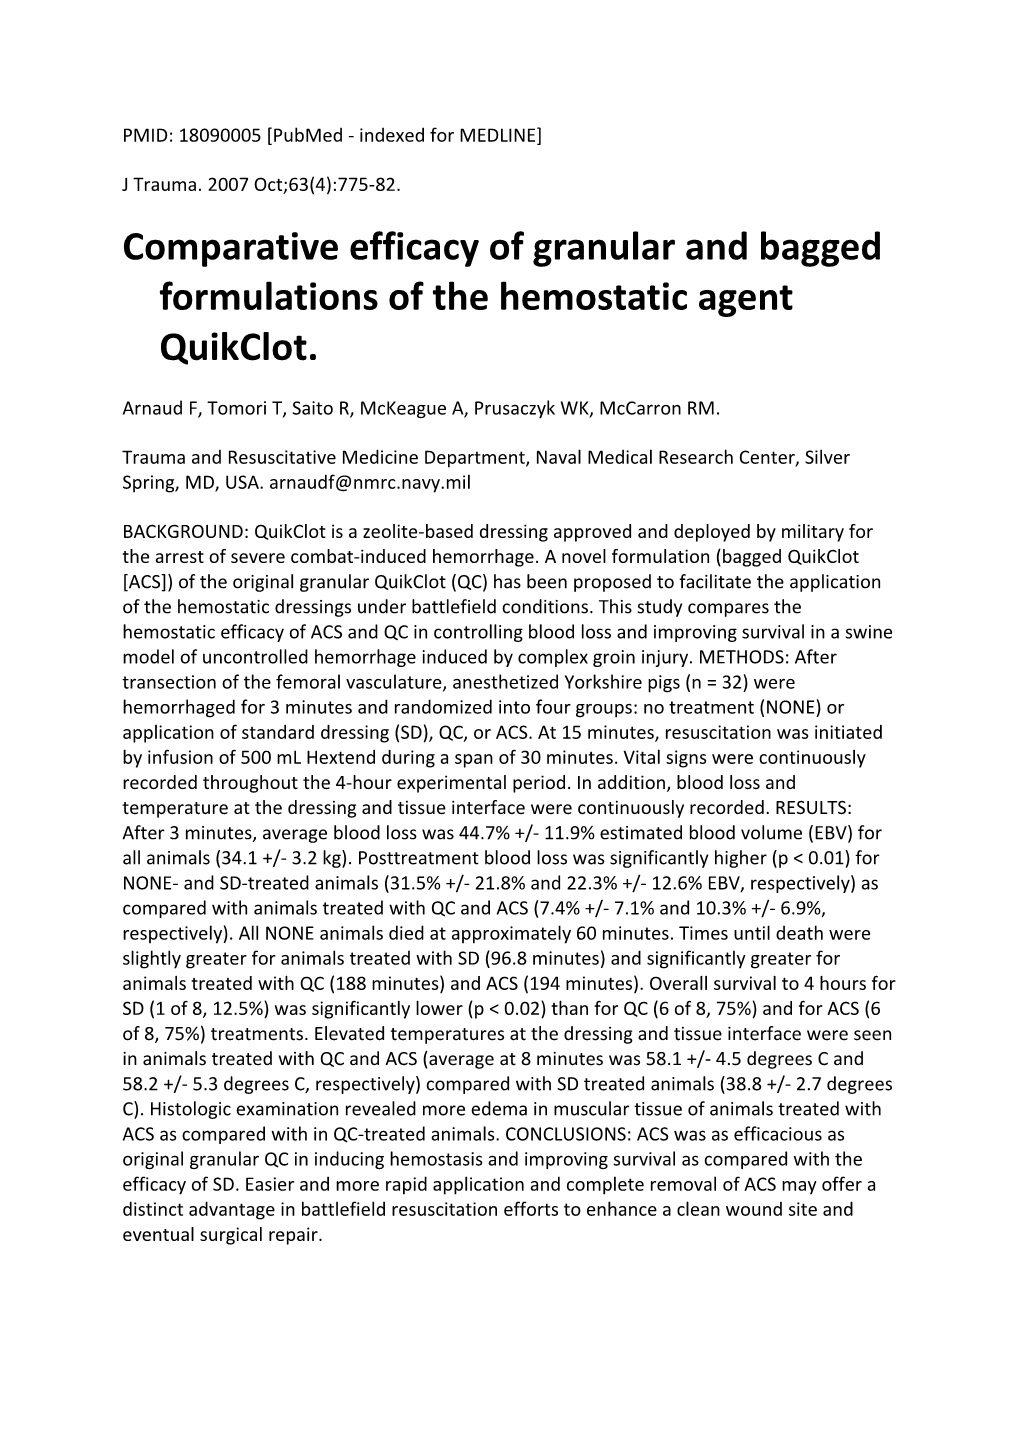 Comparative Efficacy of Granular and Bagged Formulations of the Hemostatic Agent Quikclot